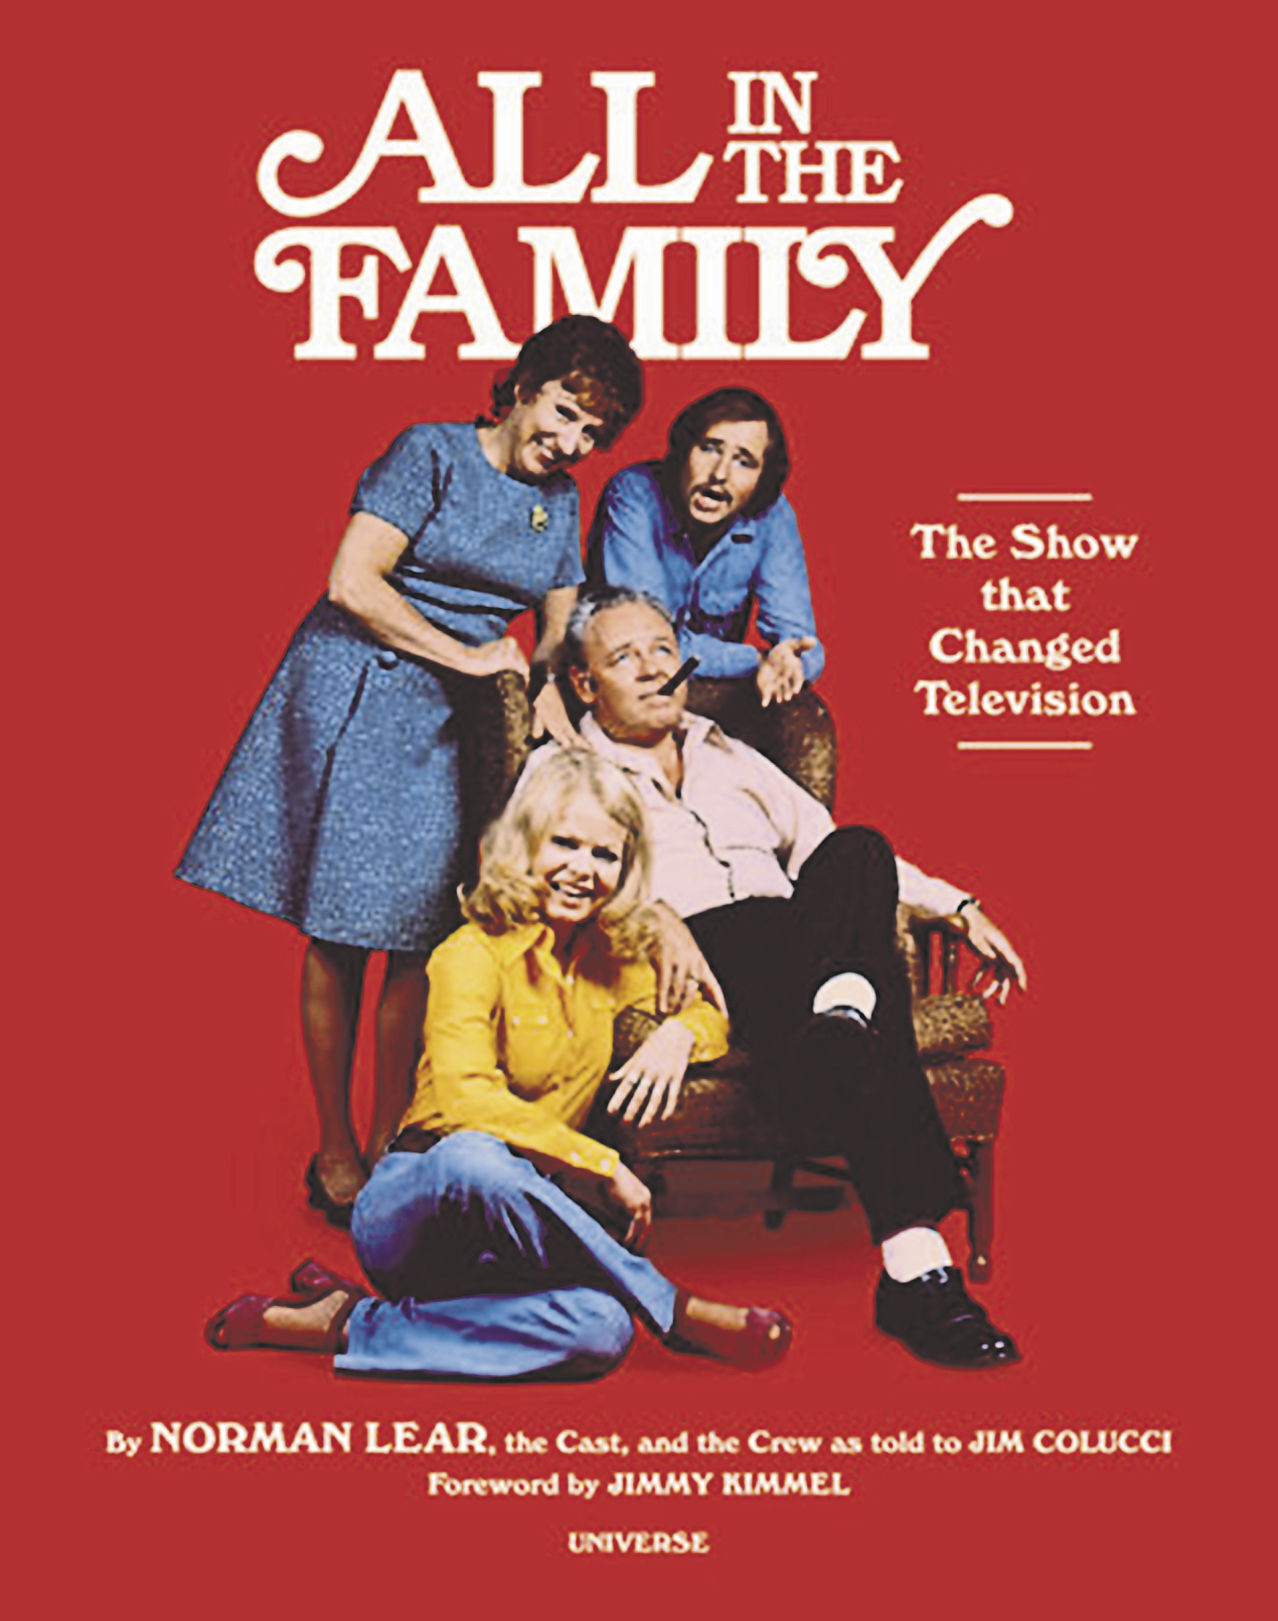 “All in the Family: The Show that Changed Television,” by Norman Lear, the cast and the crew as told to Jim Colucci.    PHOTO CREDIT: Tribune News Service